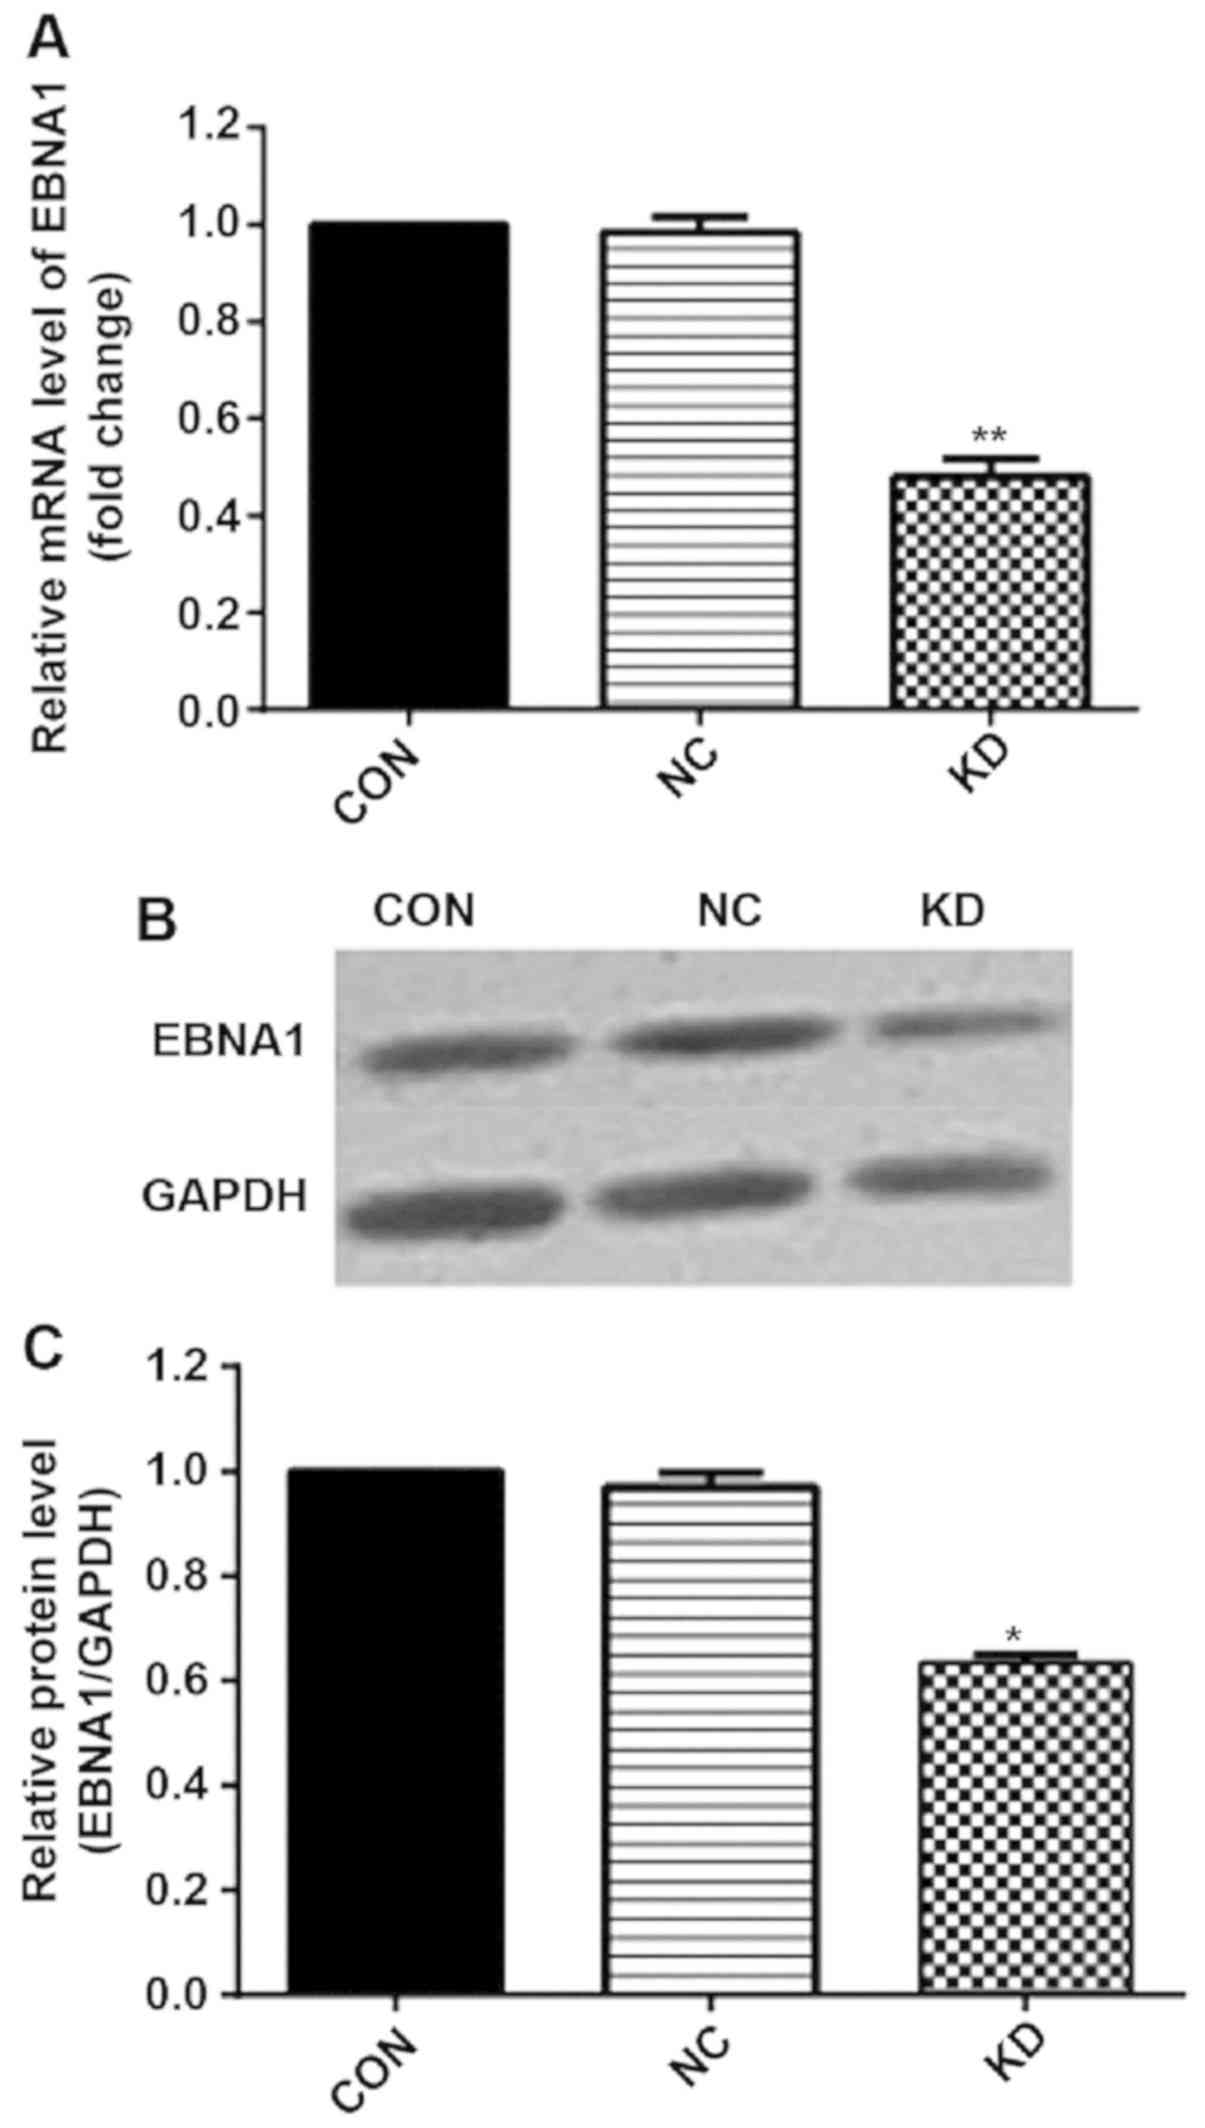 Lentivirus Mediated Rna Interference Targeting Ebna1 Gene Inhibits The Growth Of Gt 38 Cells In Vitro And In Vivo